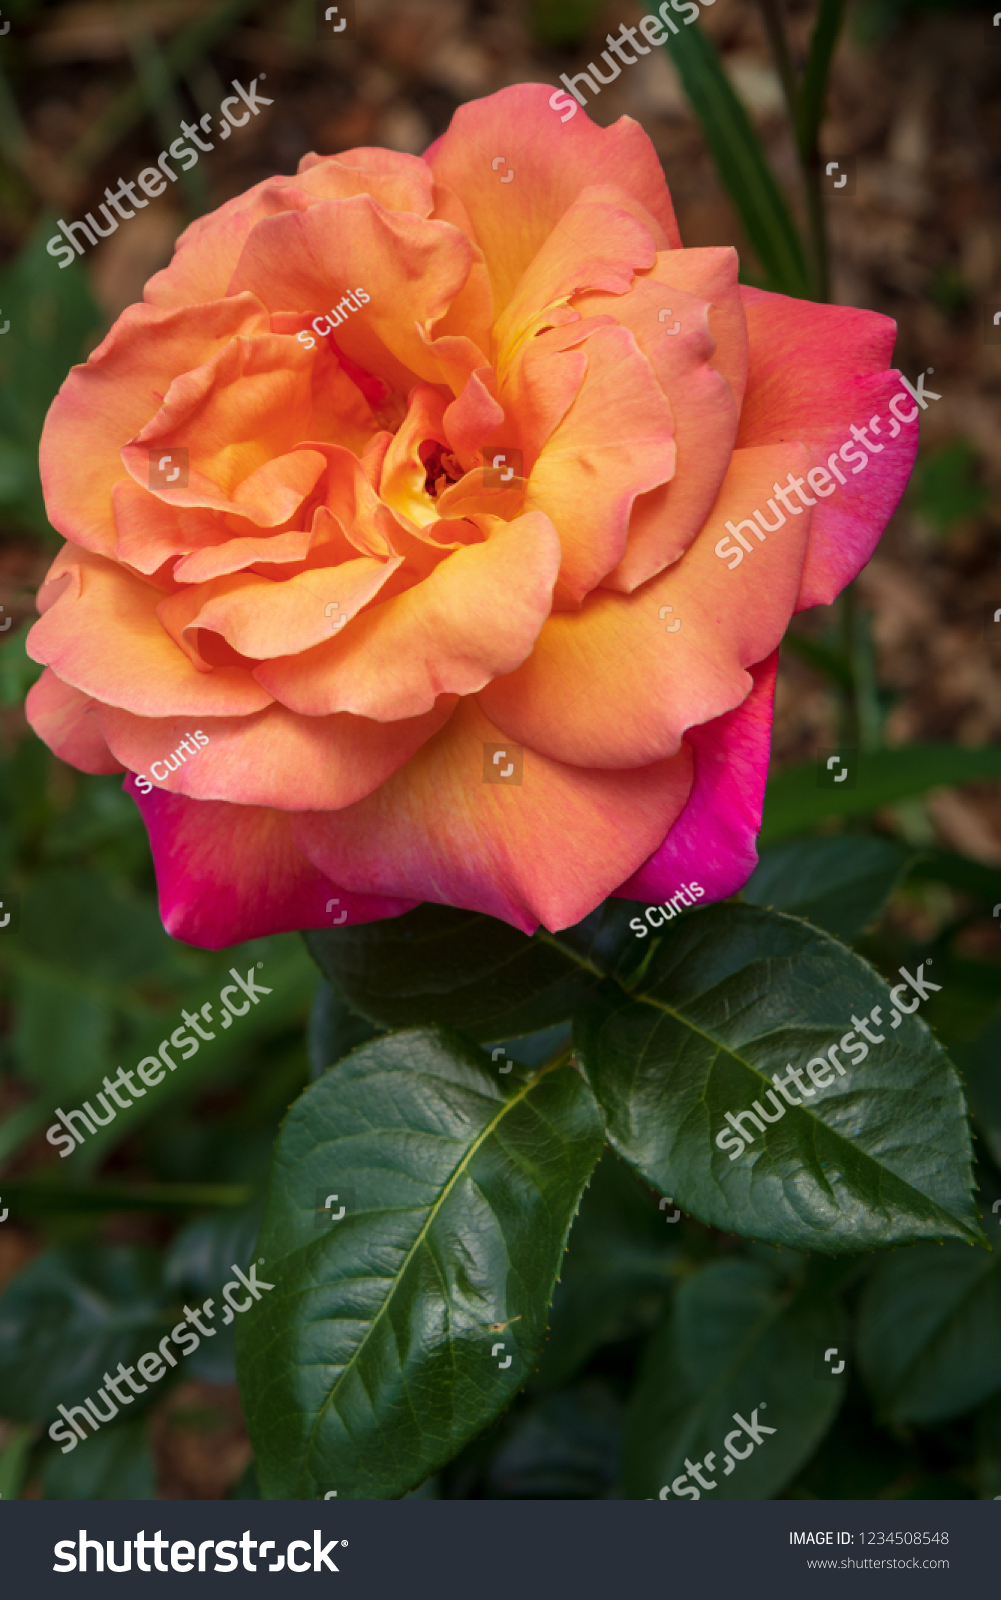 roses full bloom spring country garden stock photo (edit now